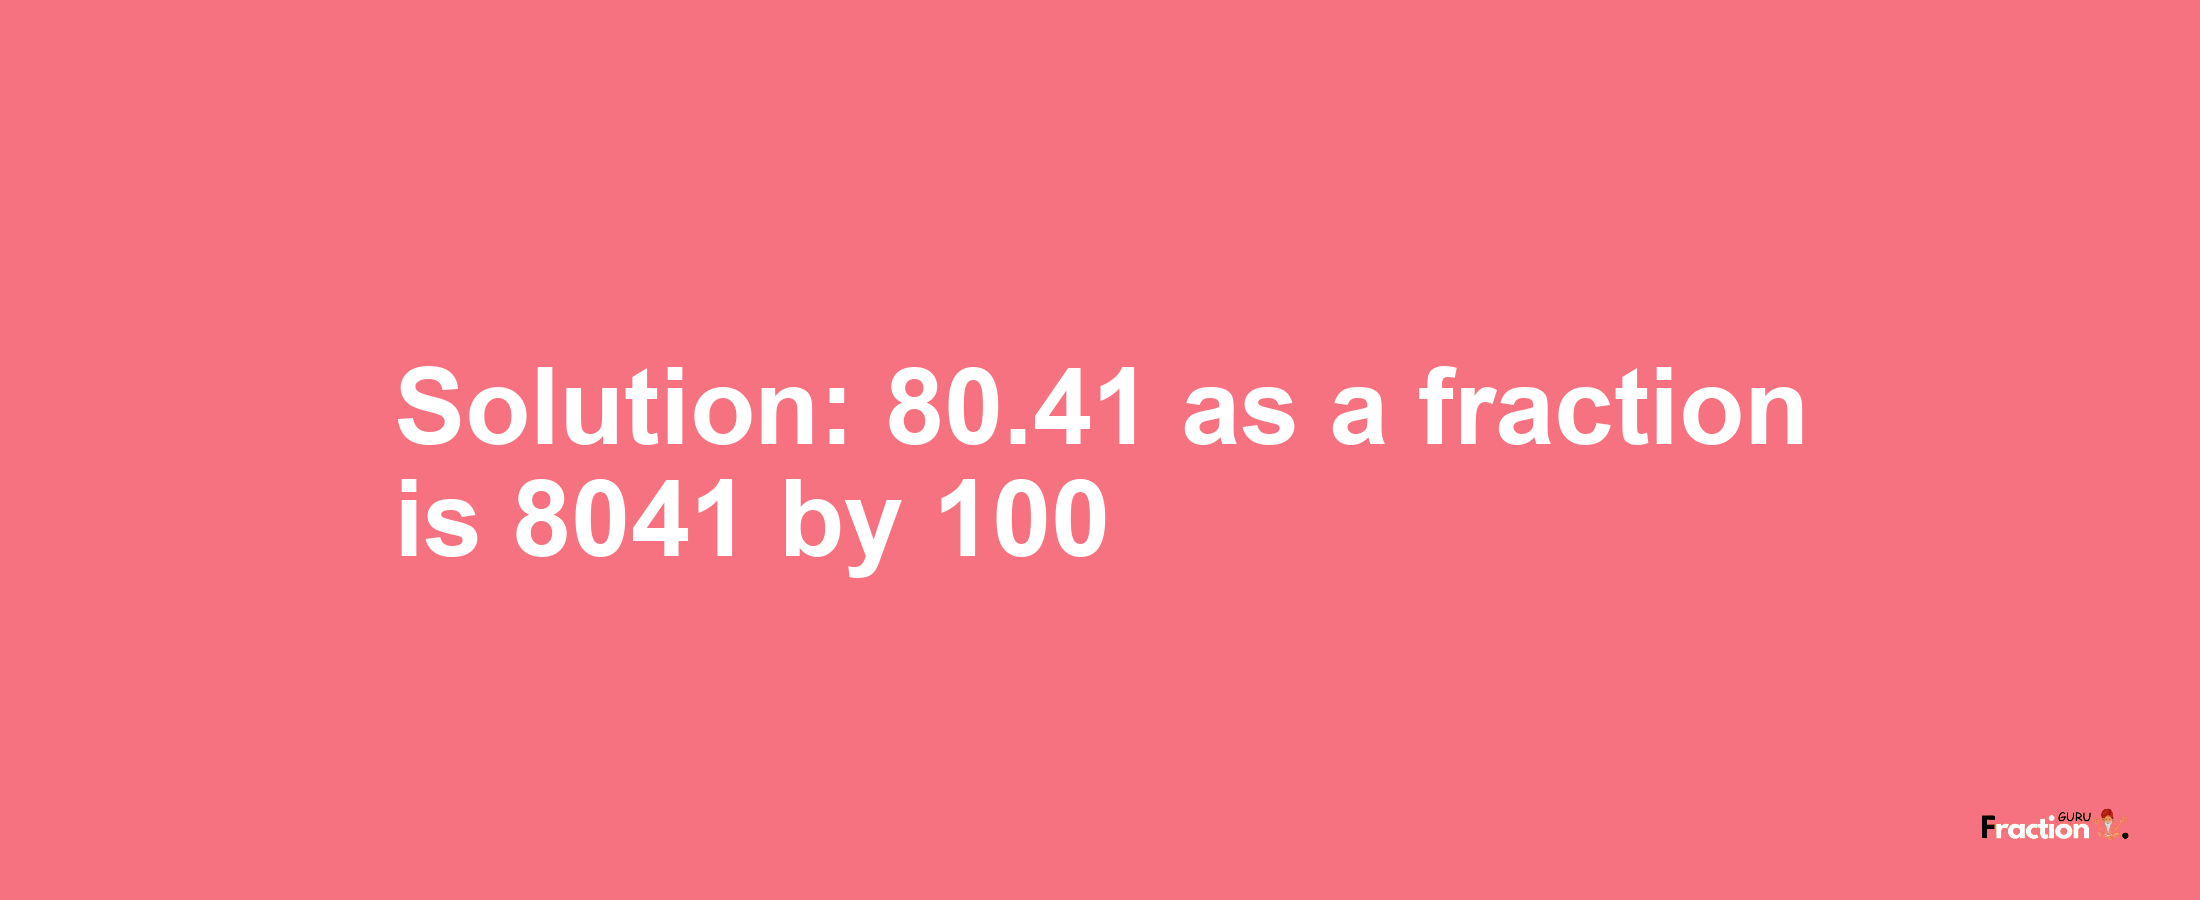 Solution:80.41 as a fraction is 8041/100